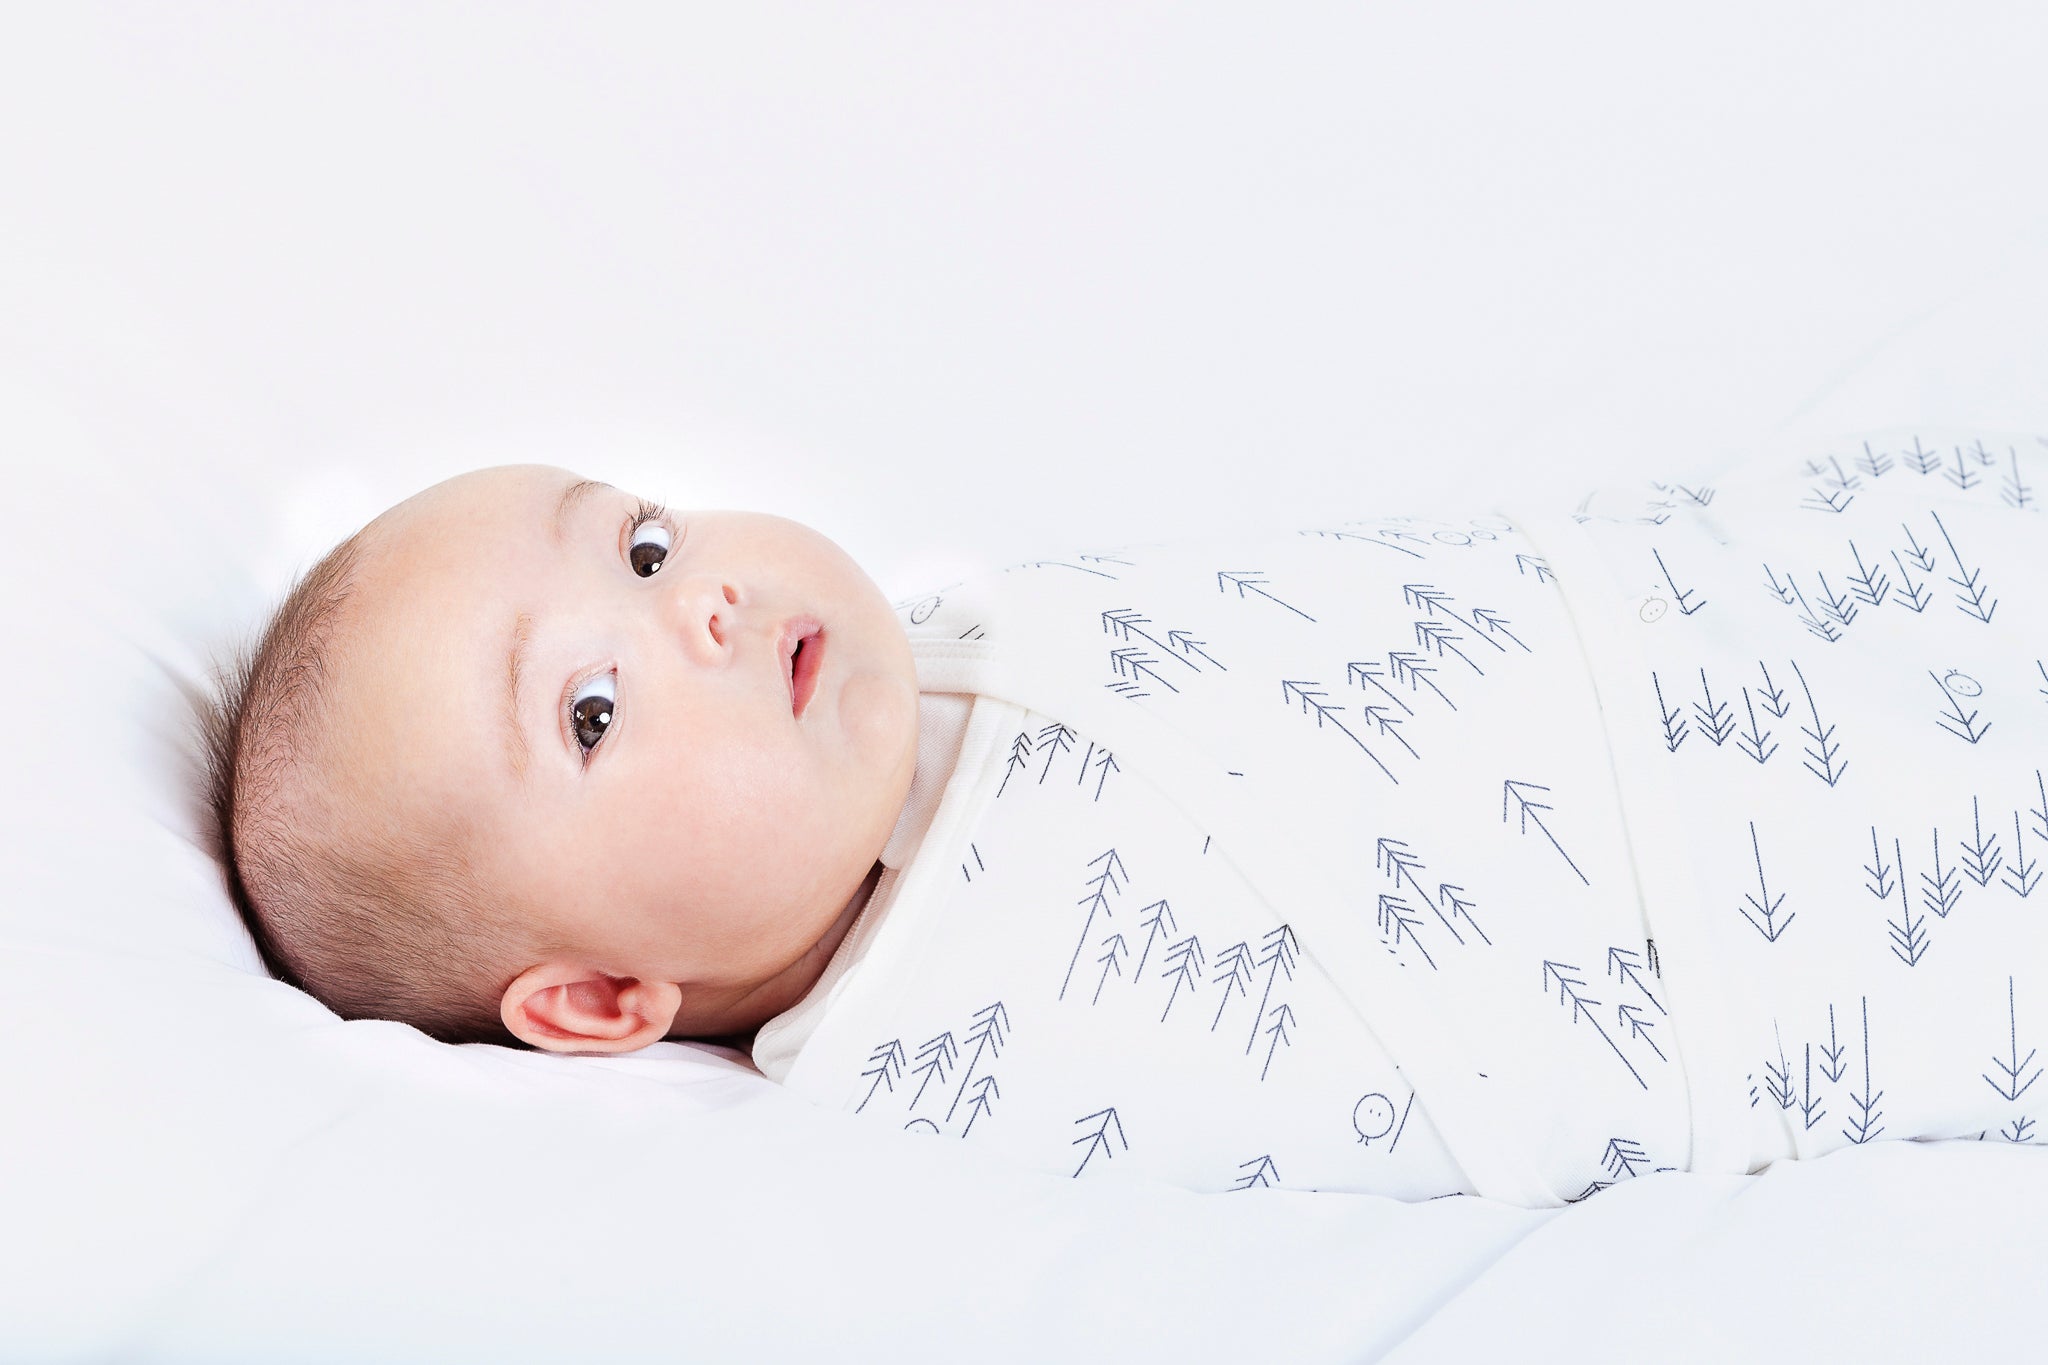 Should You Swaddle Your Newborn?